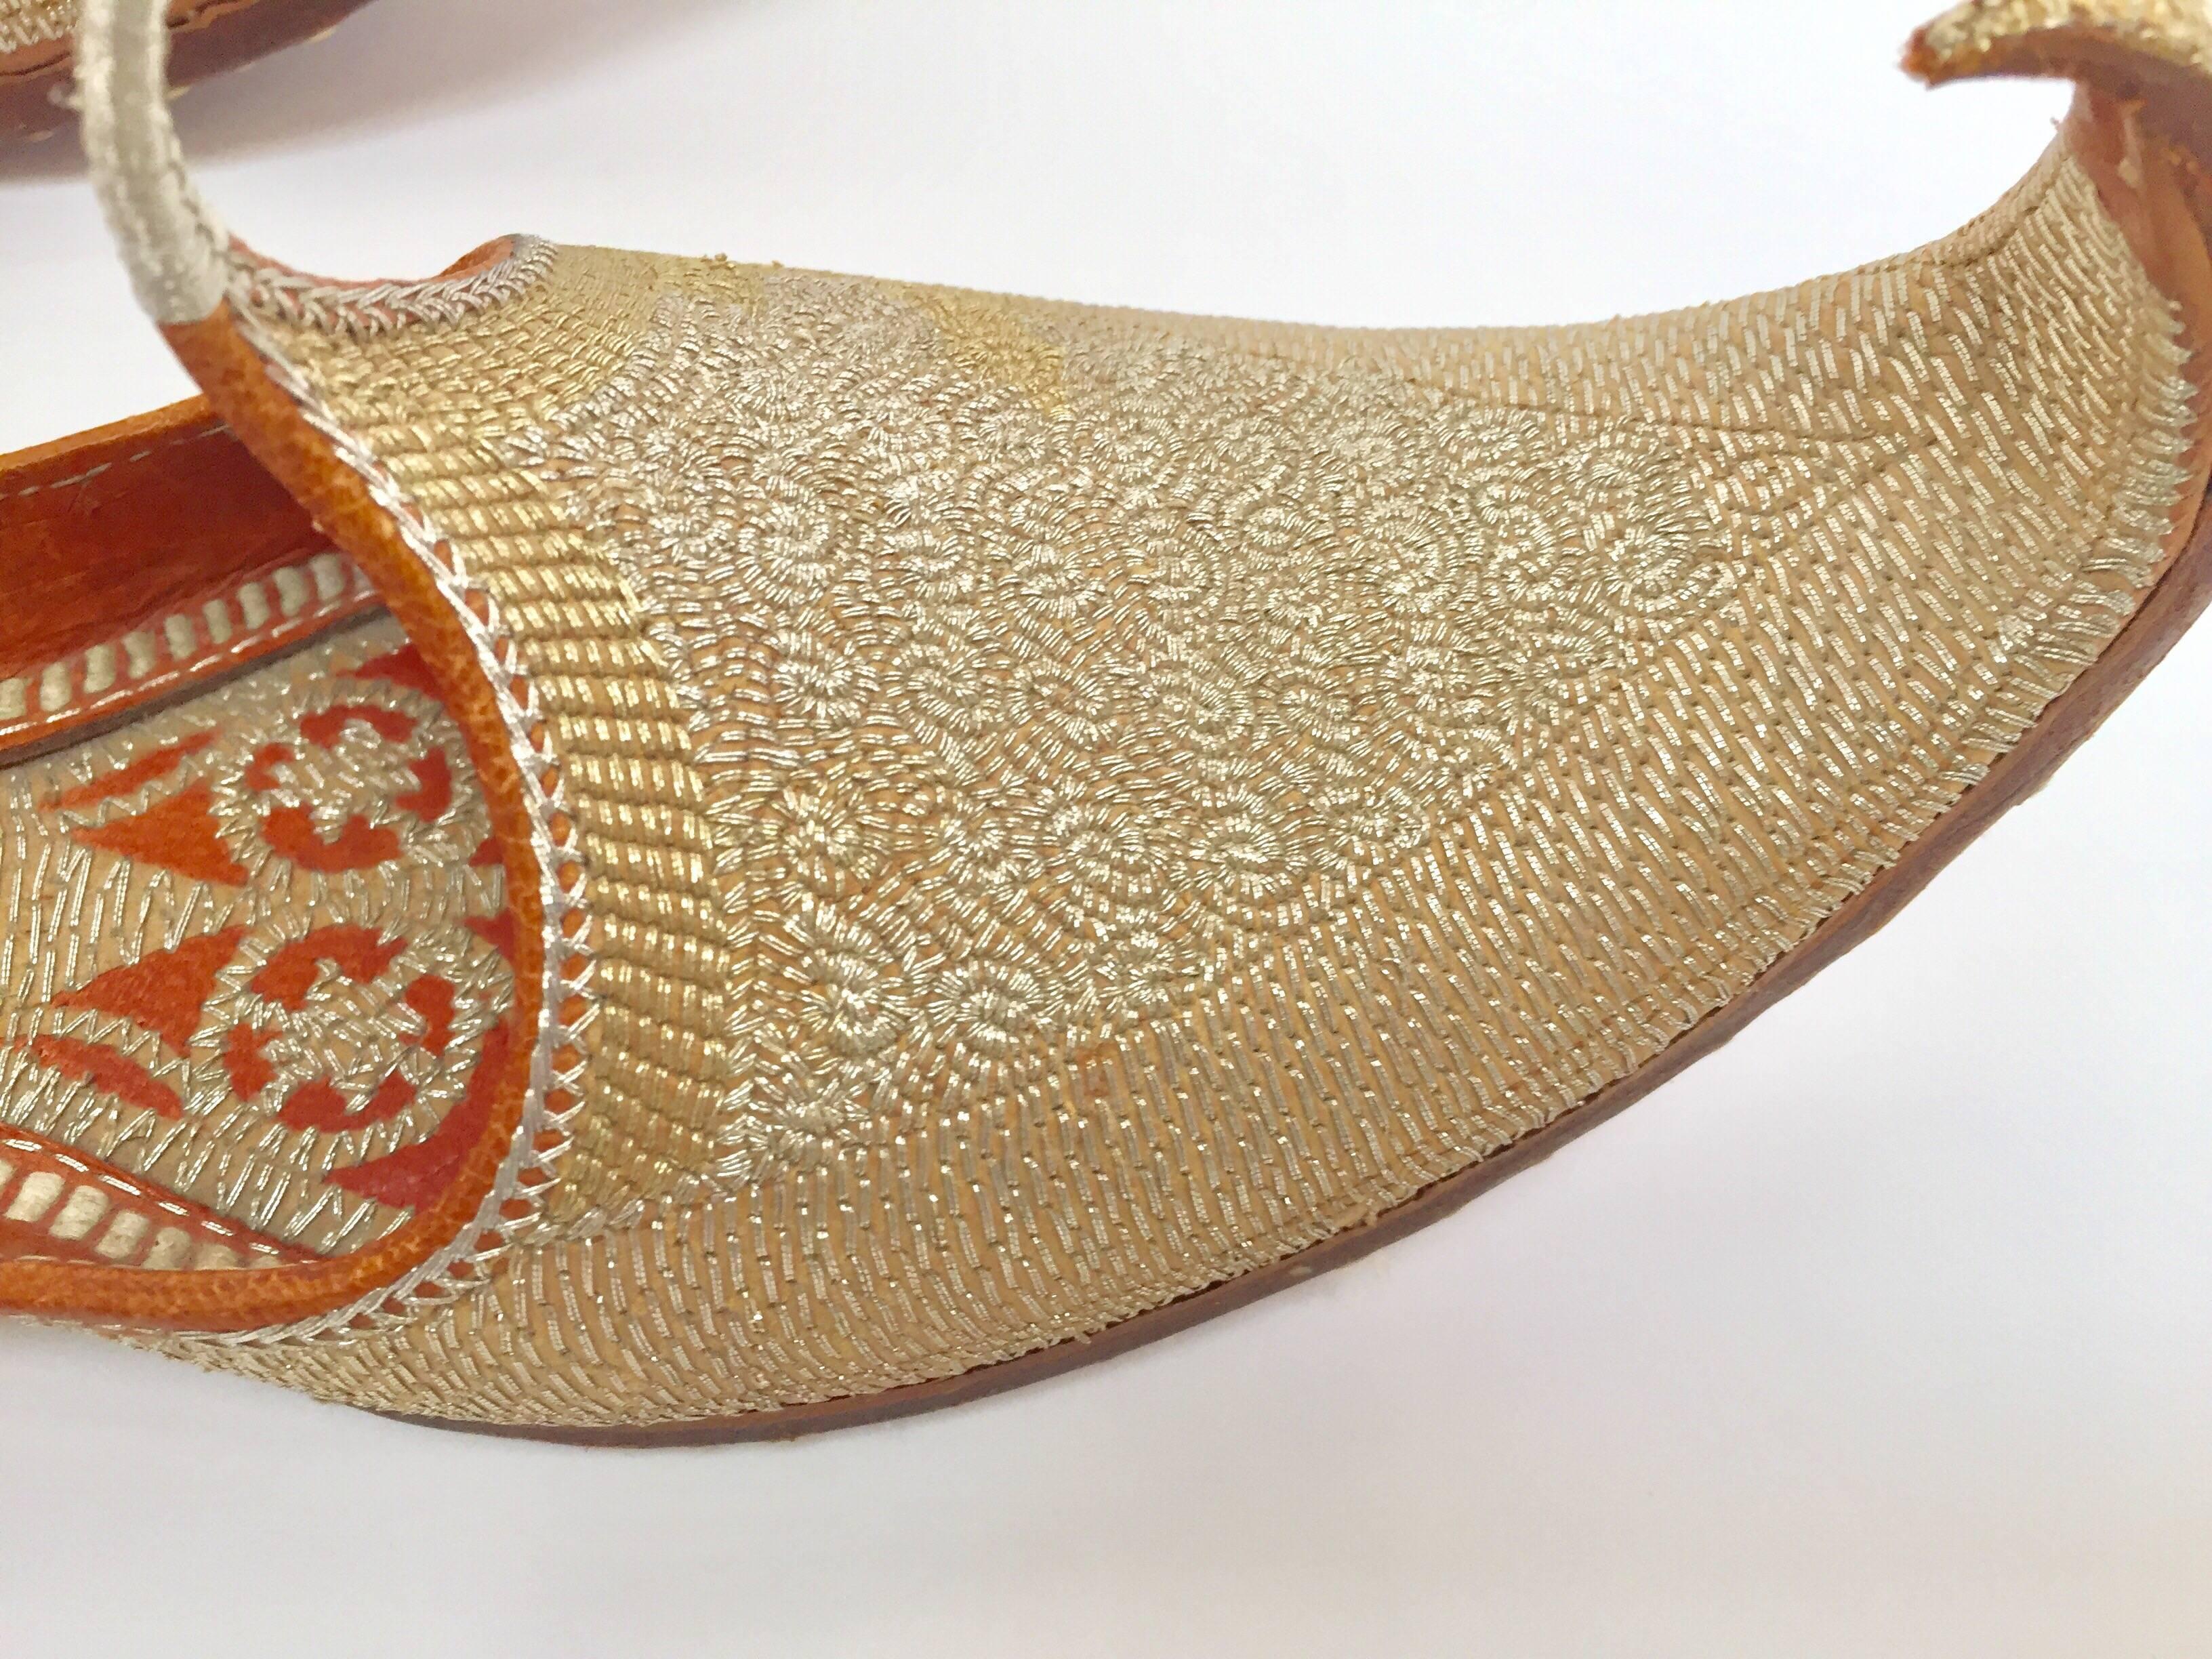 Leather Mughal Moorish Shoes with Gold Embroidered For Sale 4